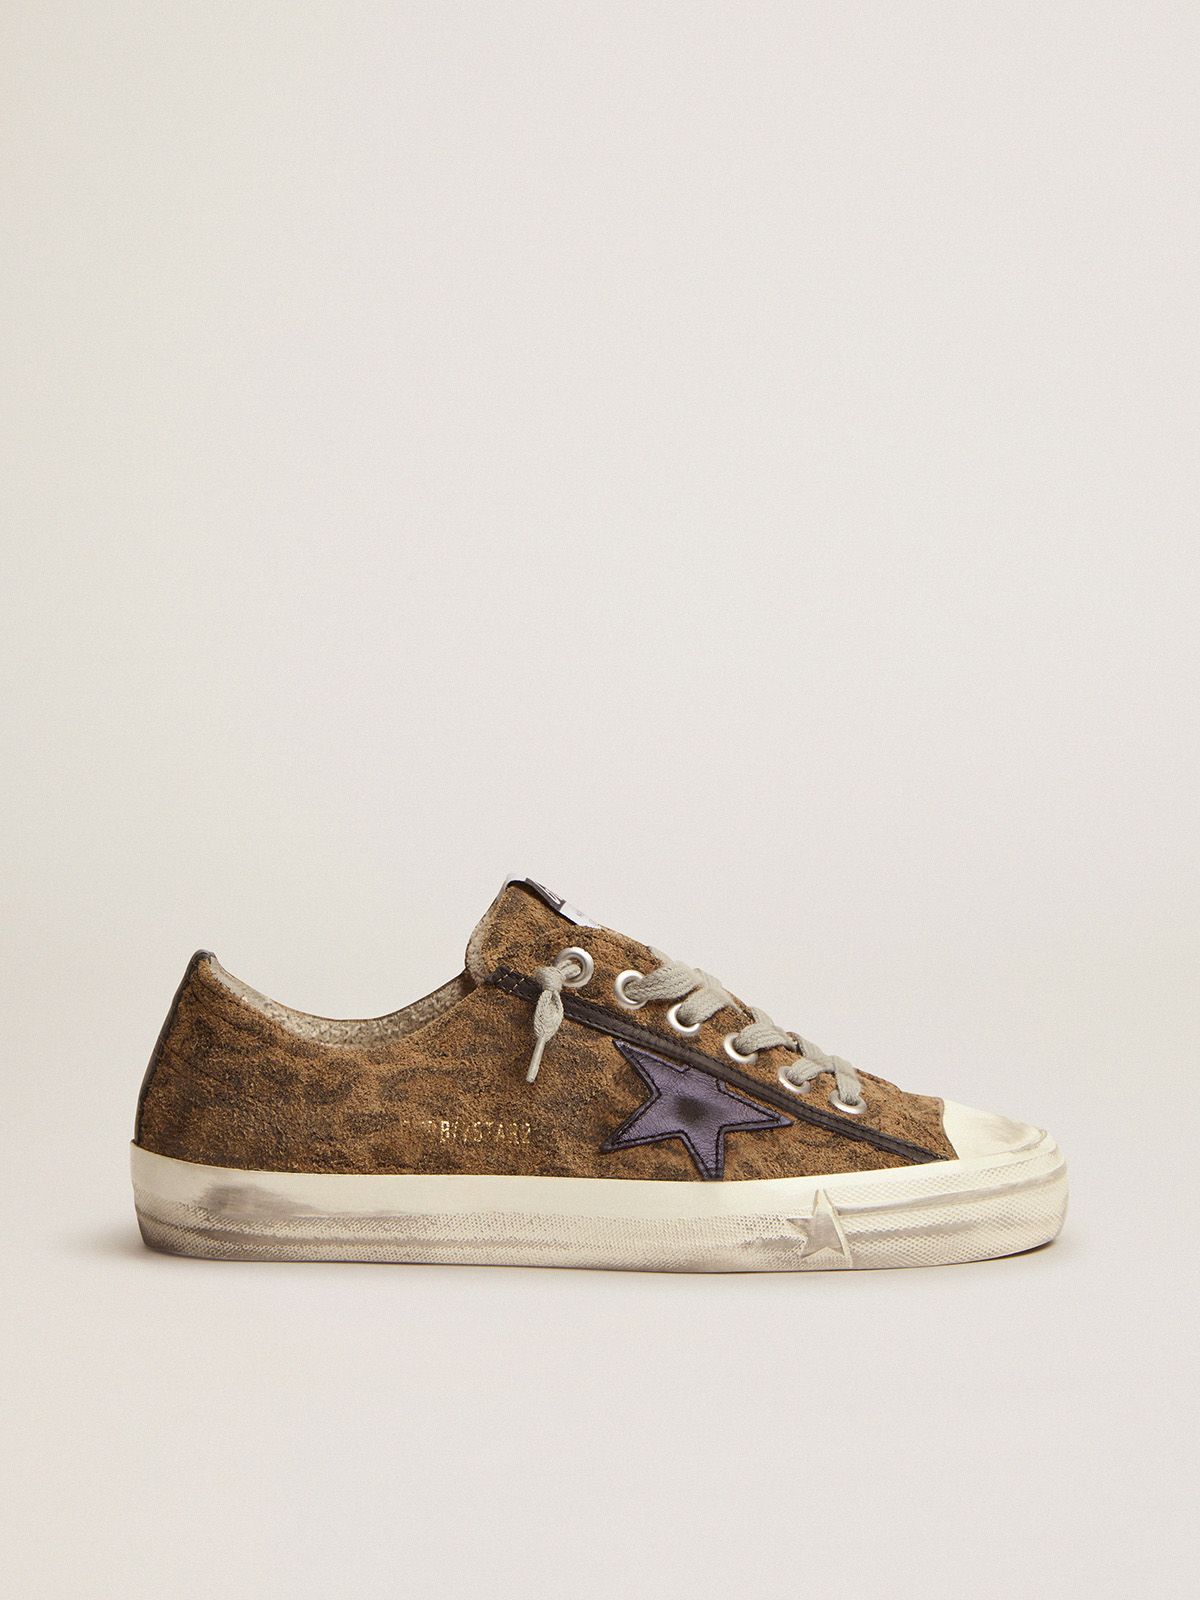 golden goose a laminated sneakers with in black star LTD suede leather leopard-print V-star